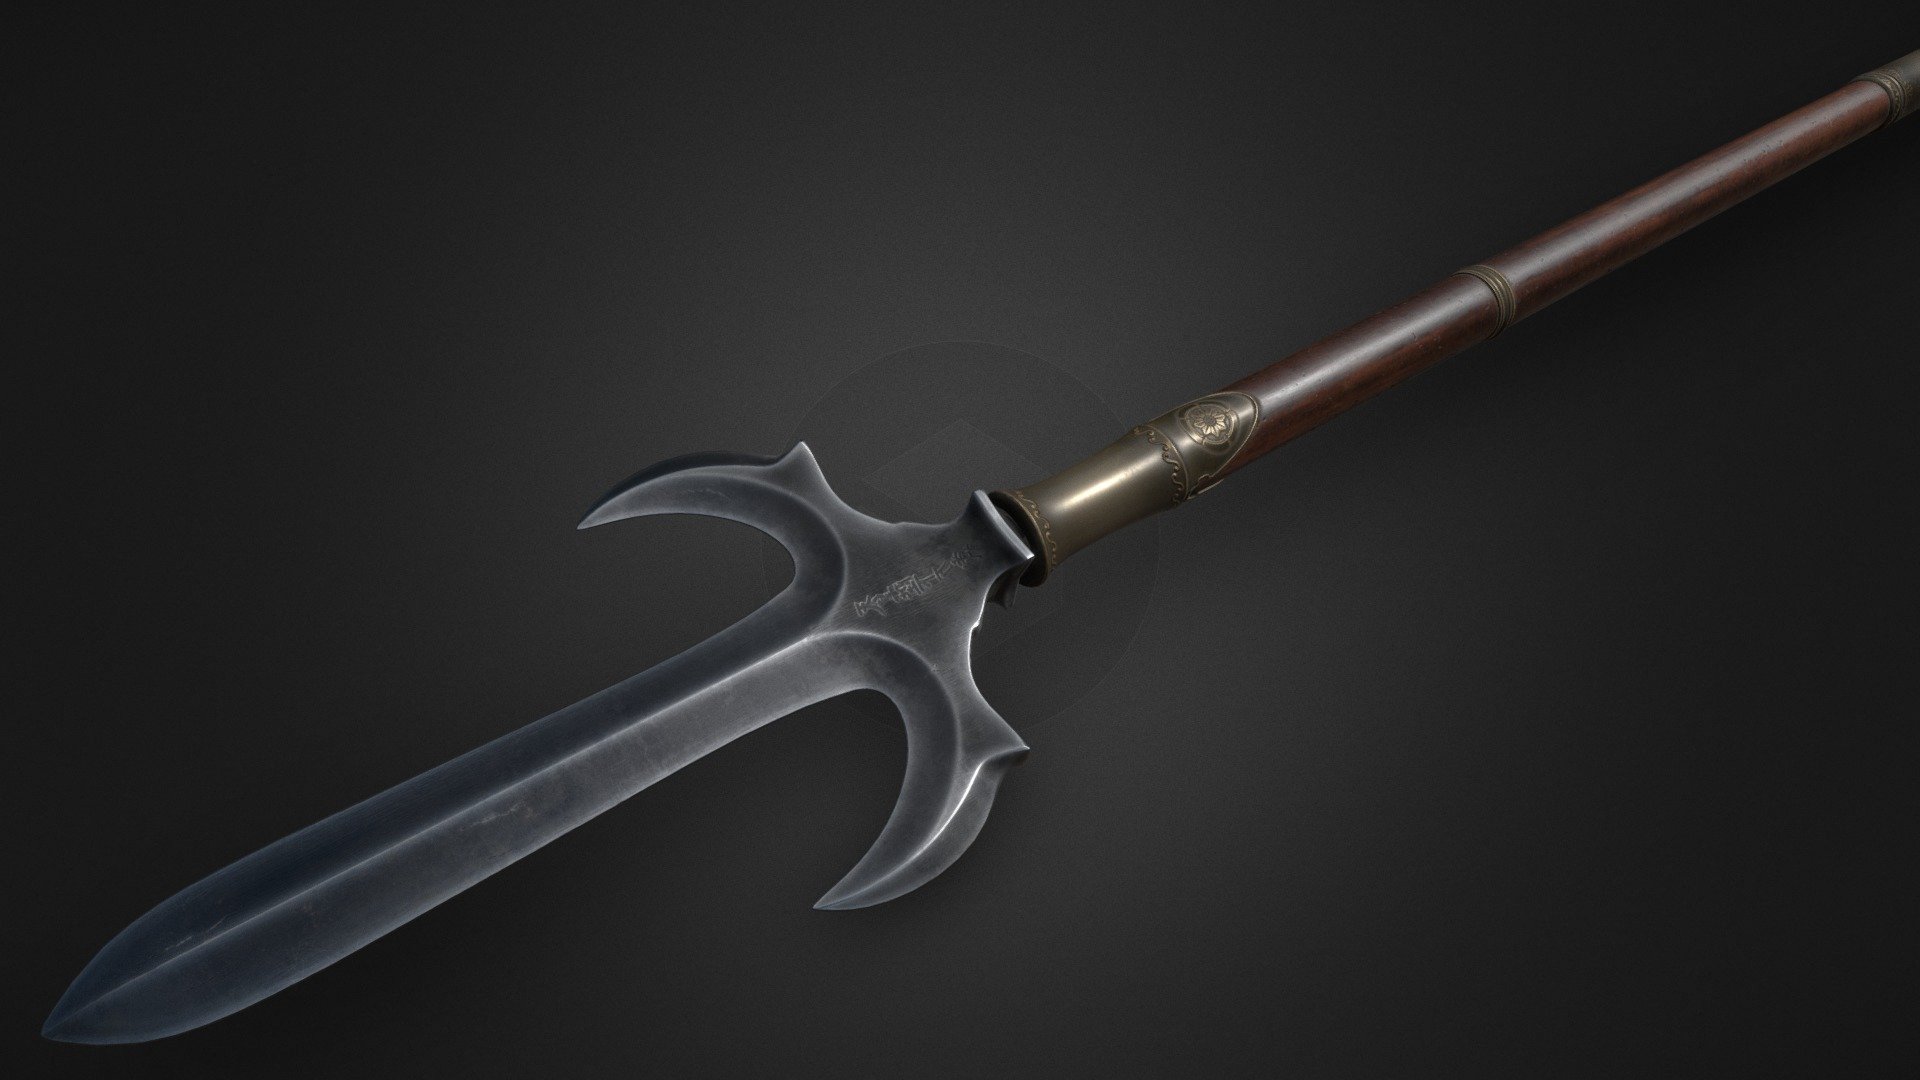 Yari (Japanese spear) low poly model.

4k textures. Total polycount 8084 tris.

Model created on Blander and ZBrush. Textured with Substance Painter 3d model